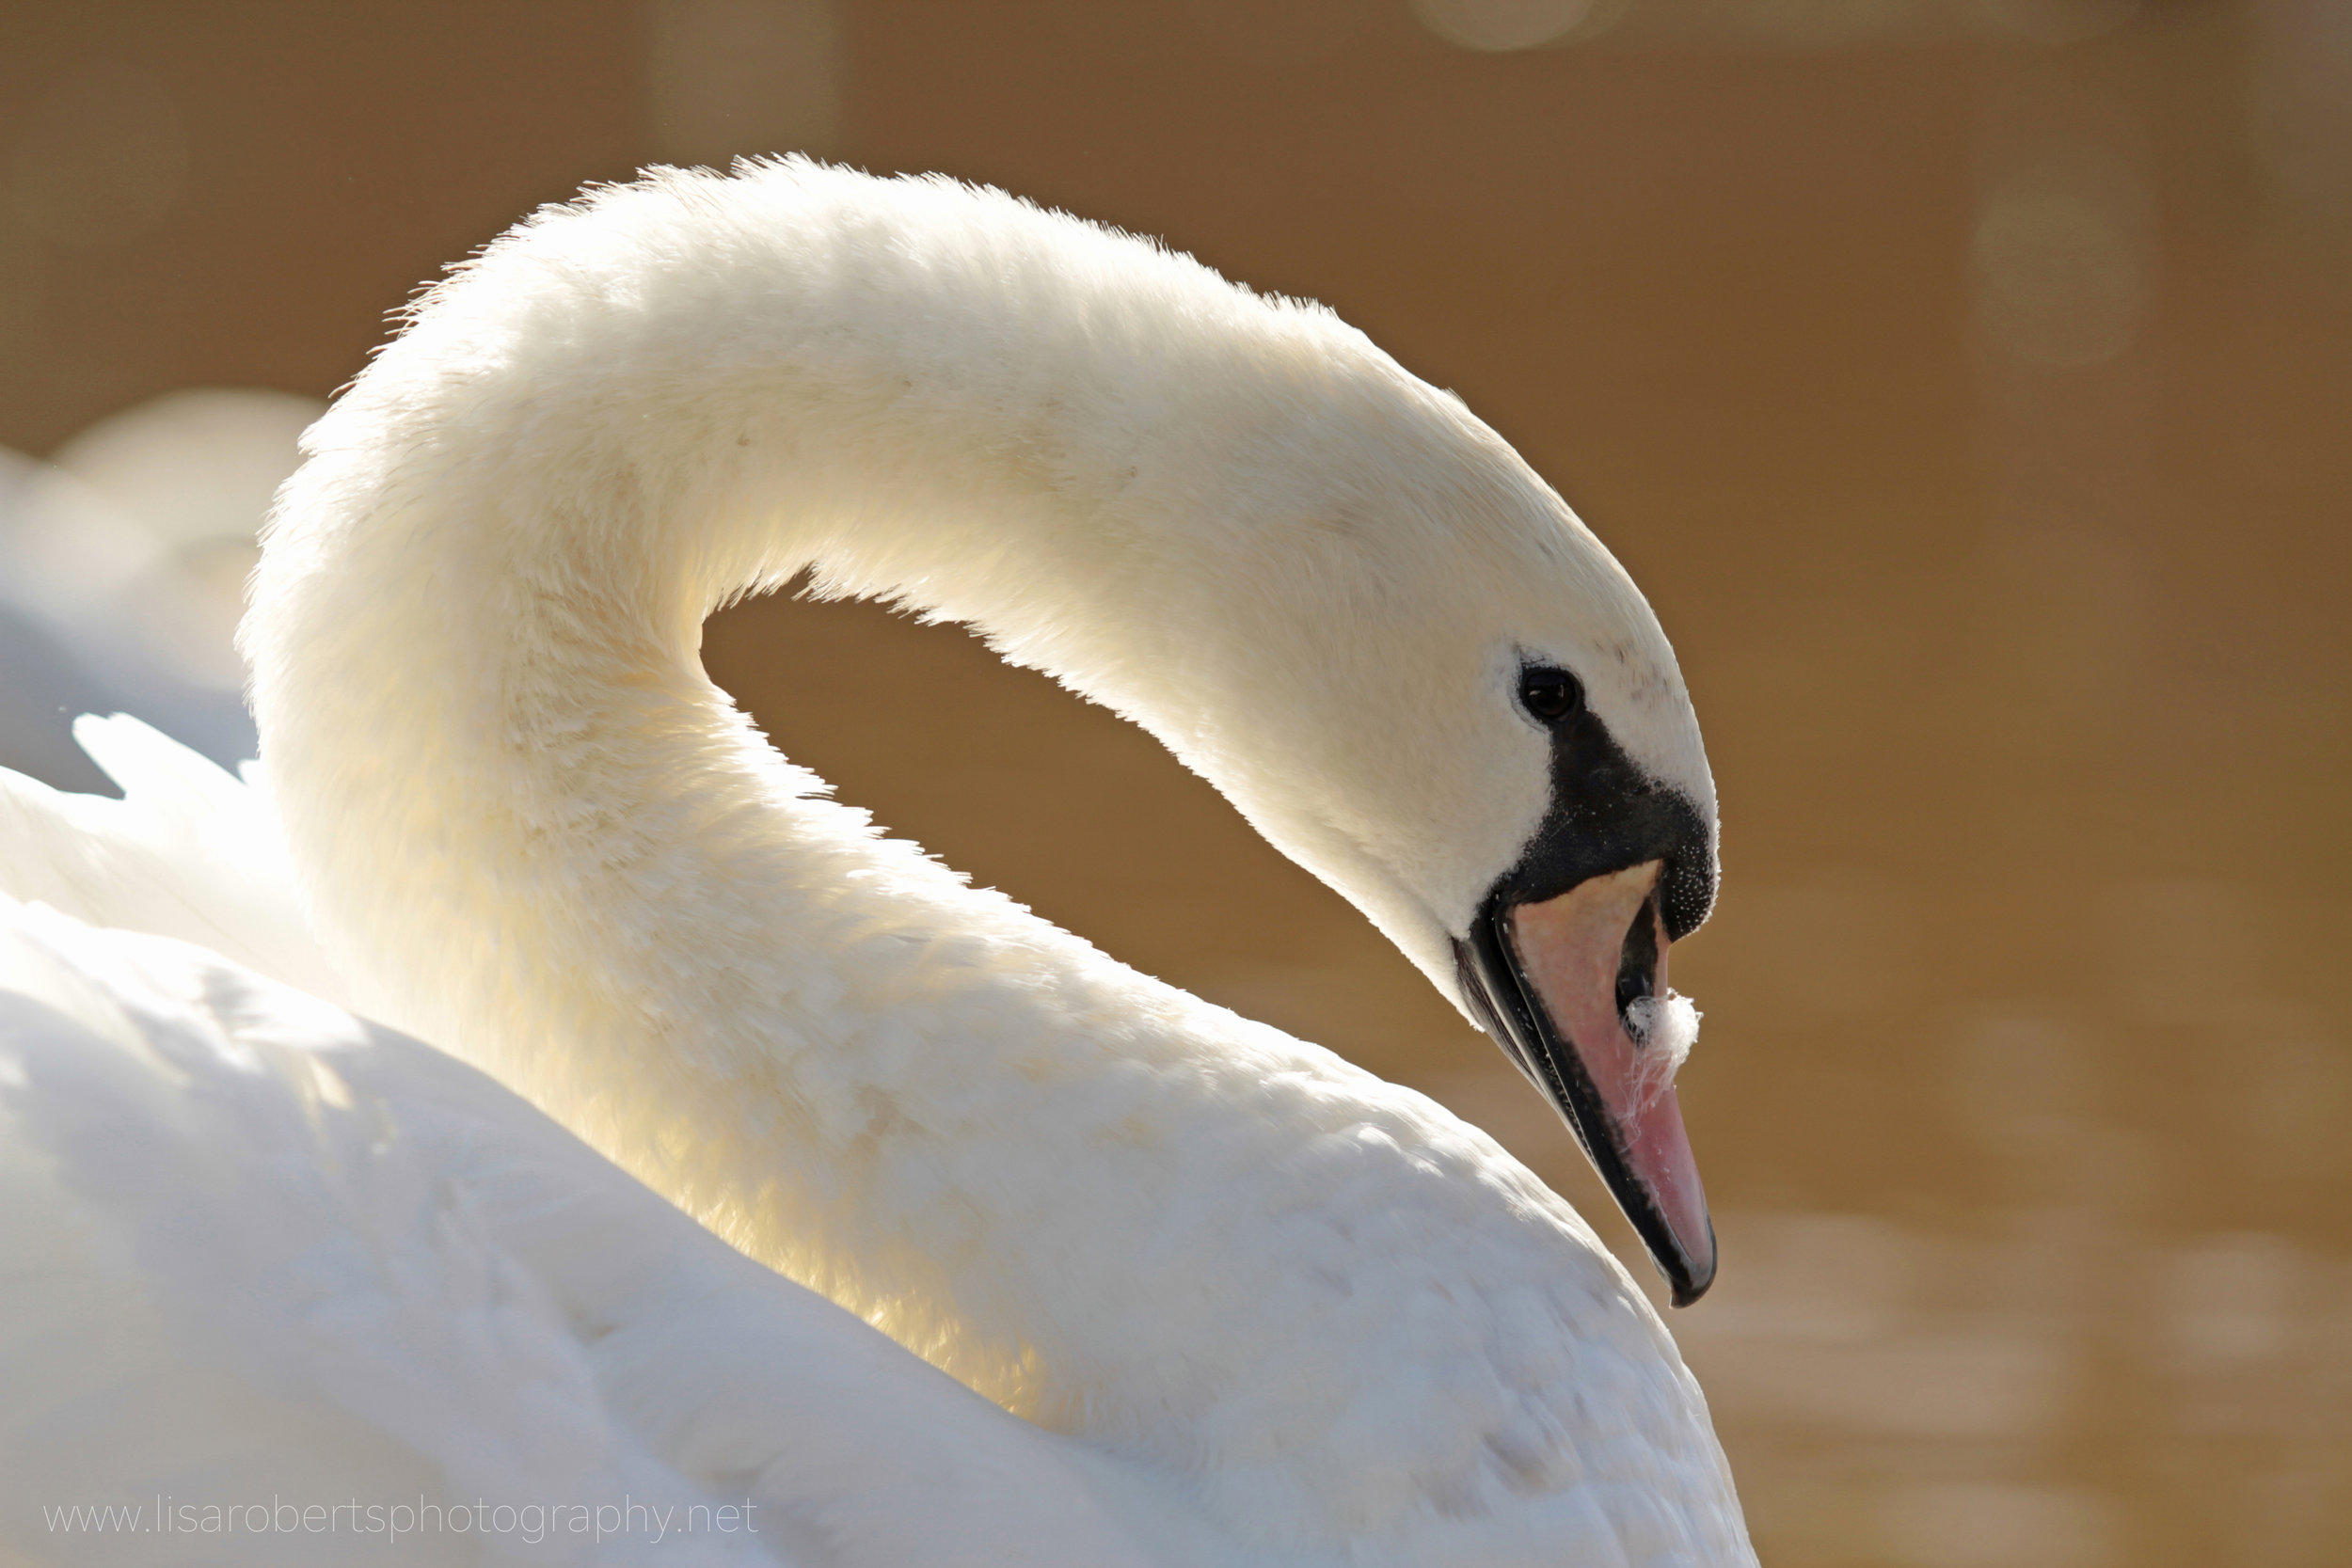  Female Swan with feather on beak 